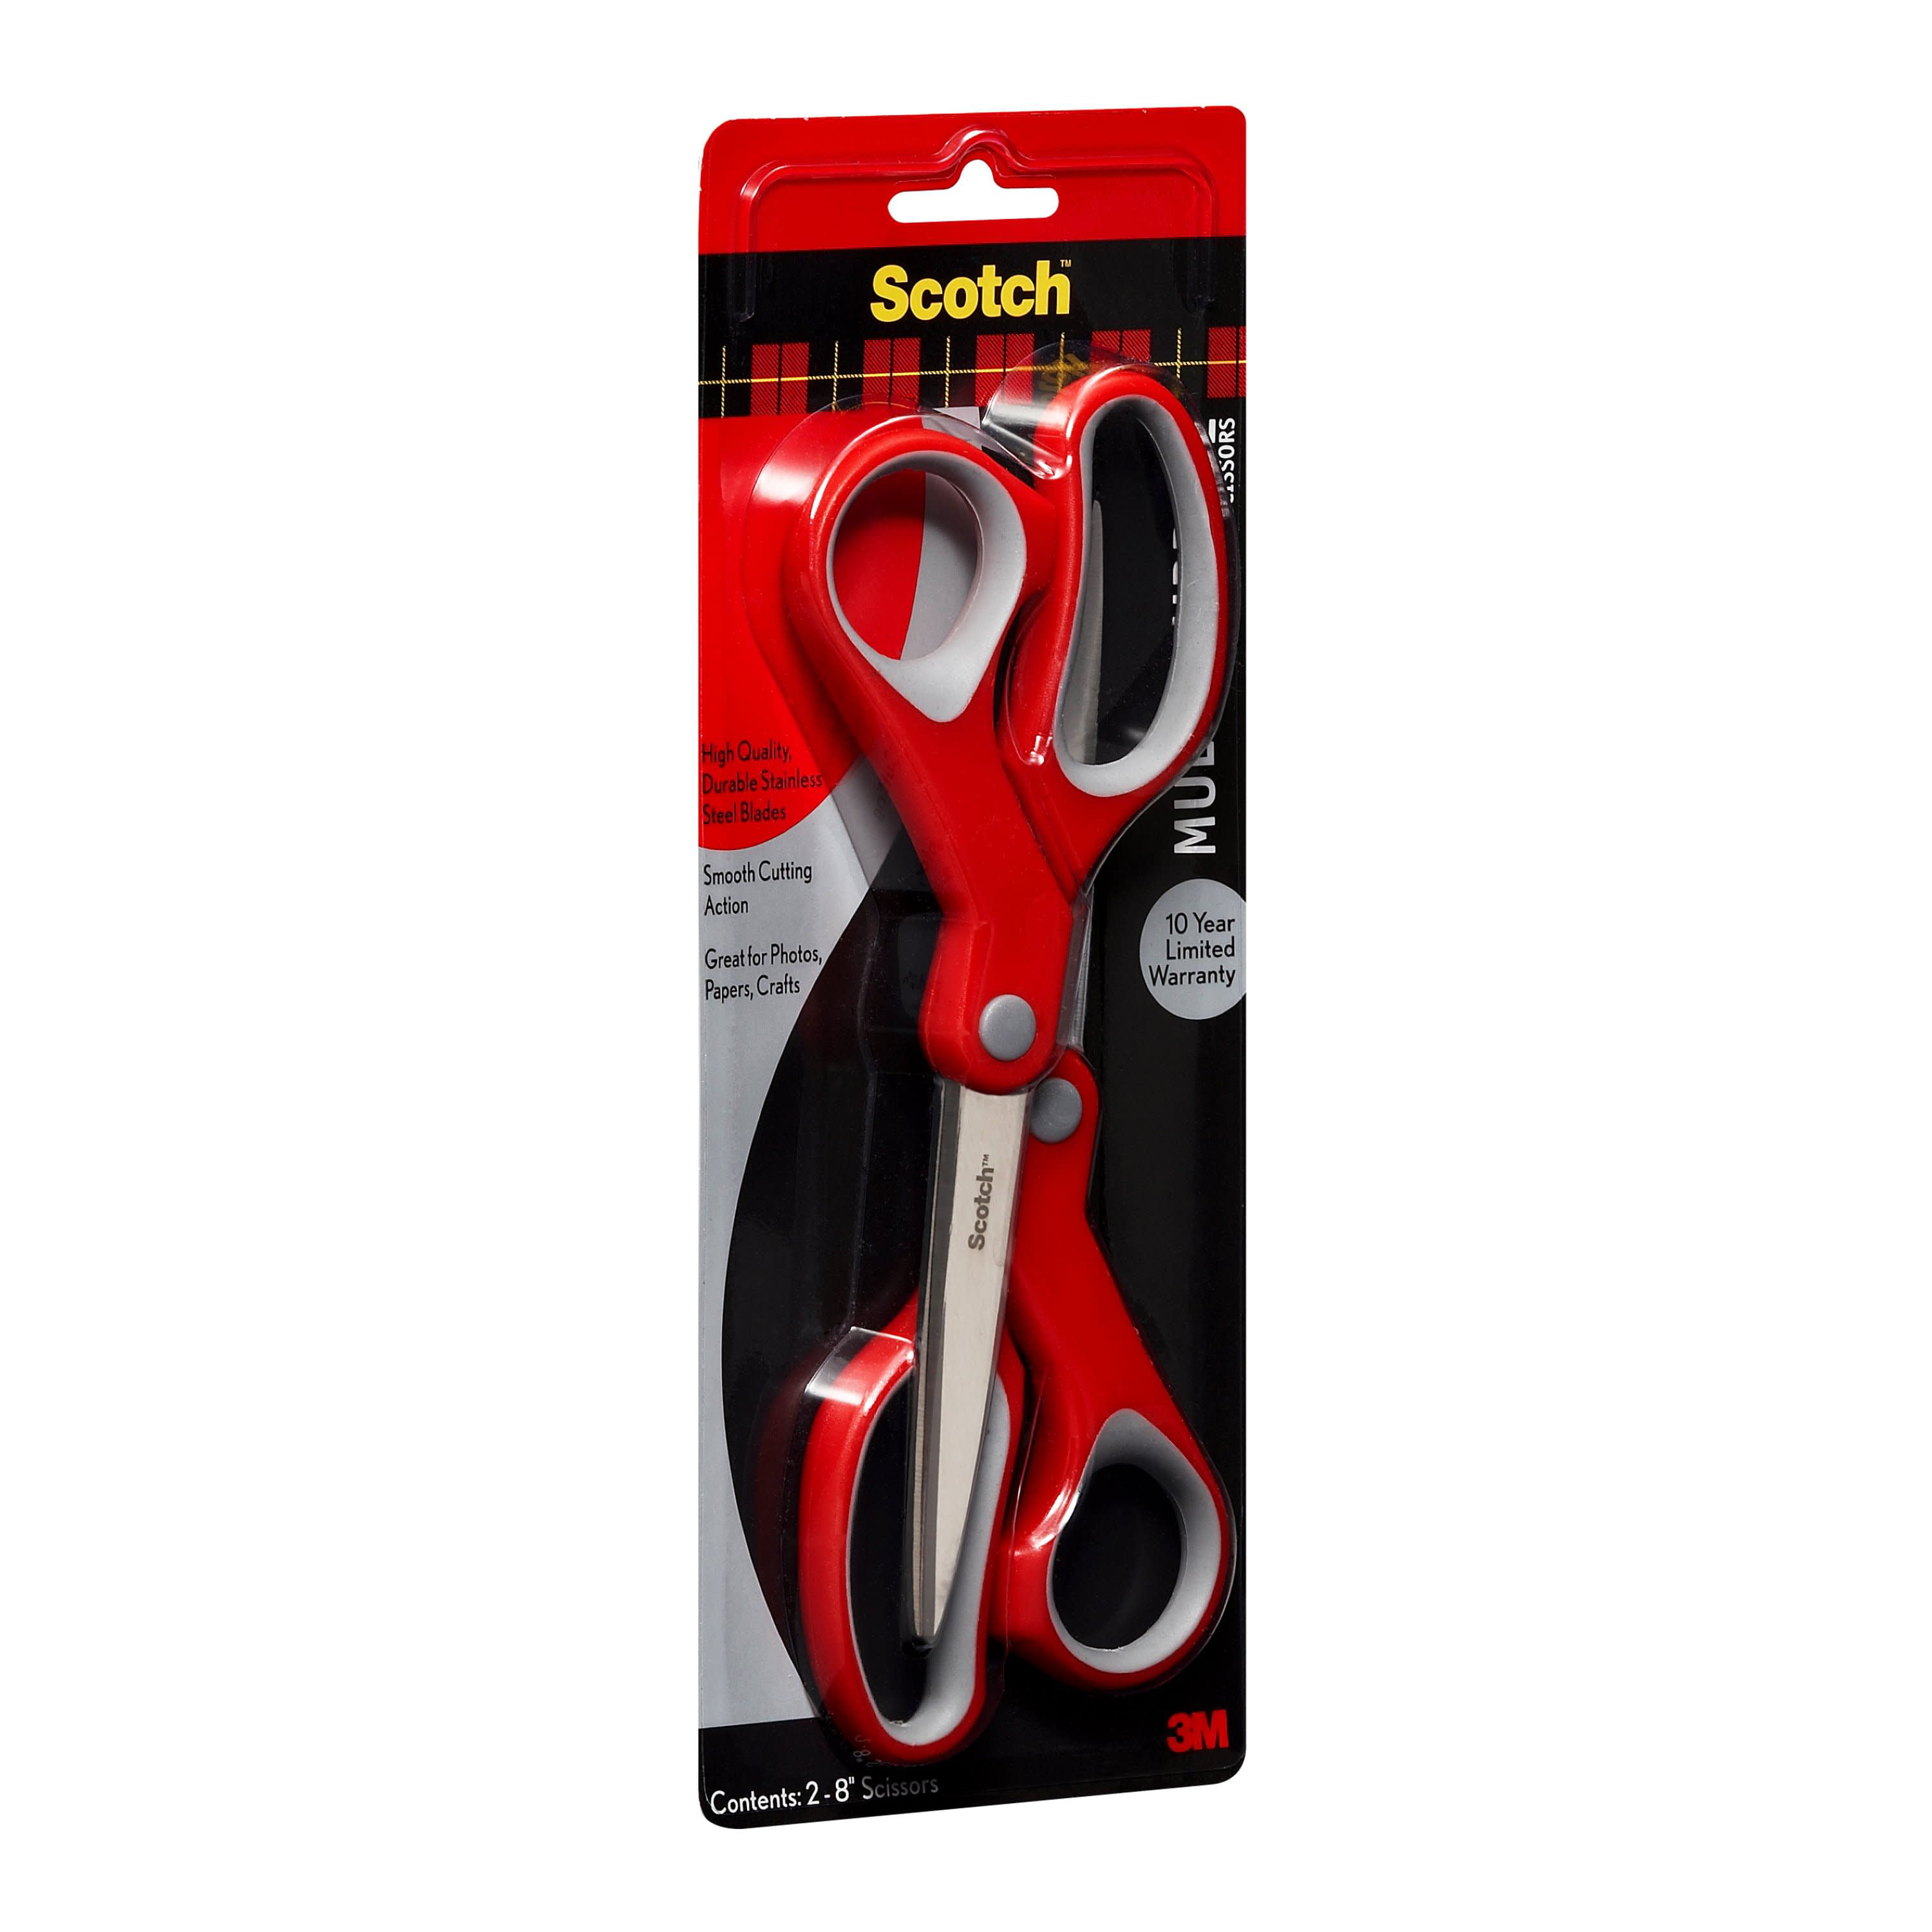 Scotch Household Scissor, 8-Inches Red Handle Light Duty Cutting Stainless  Steel